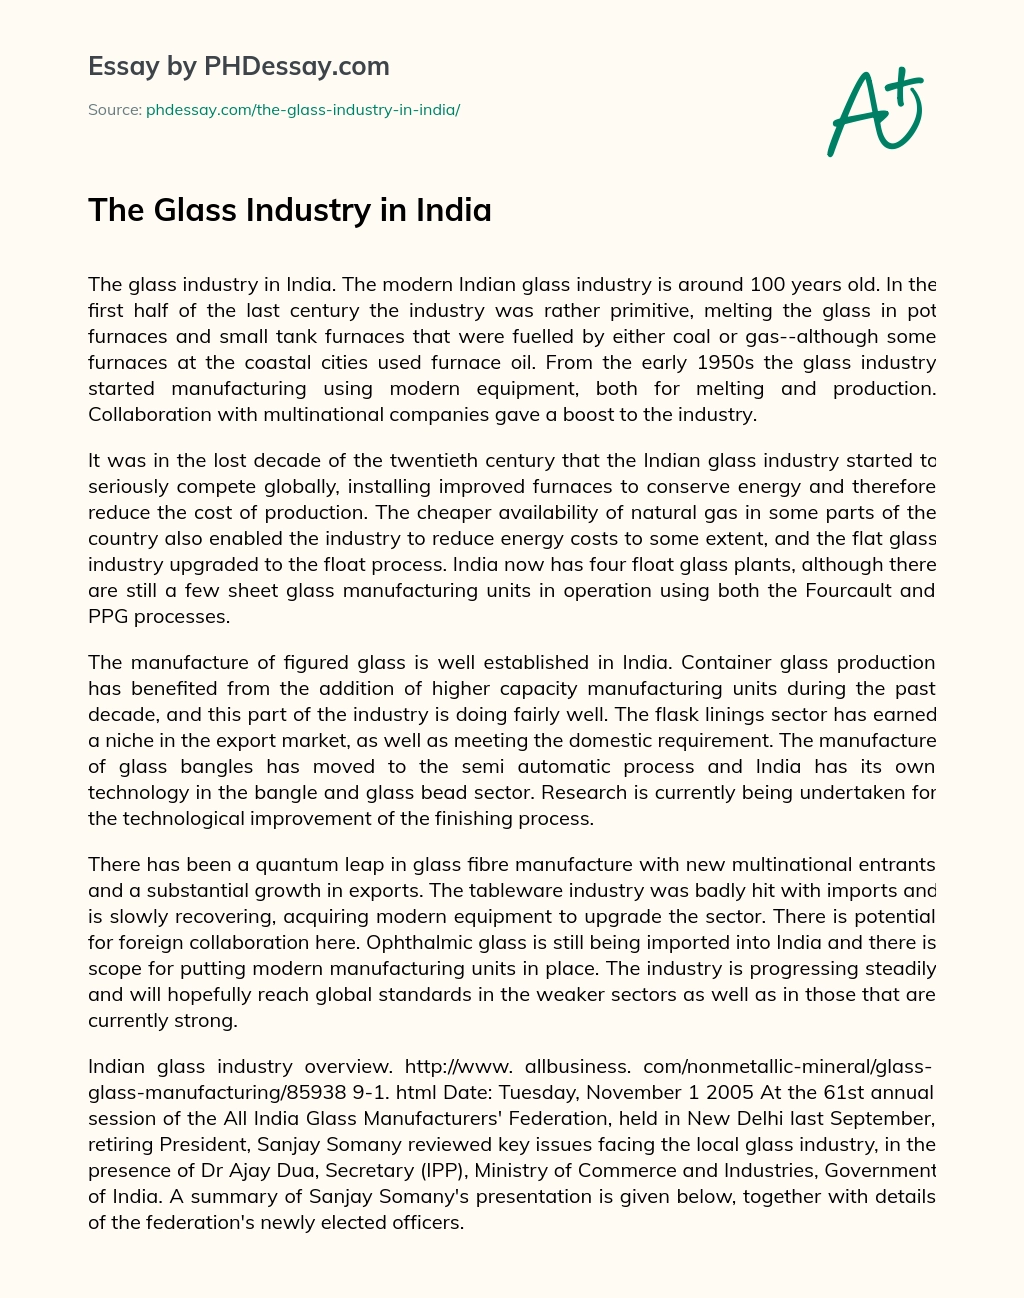 The Glass Industry in India essay